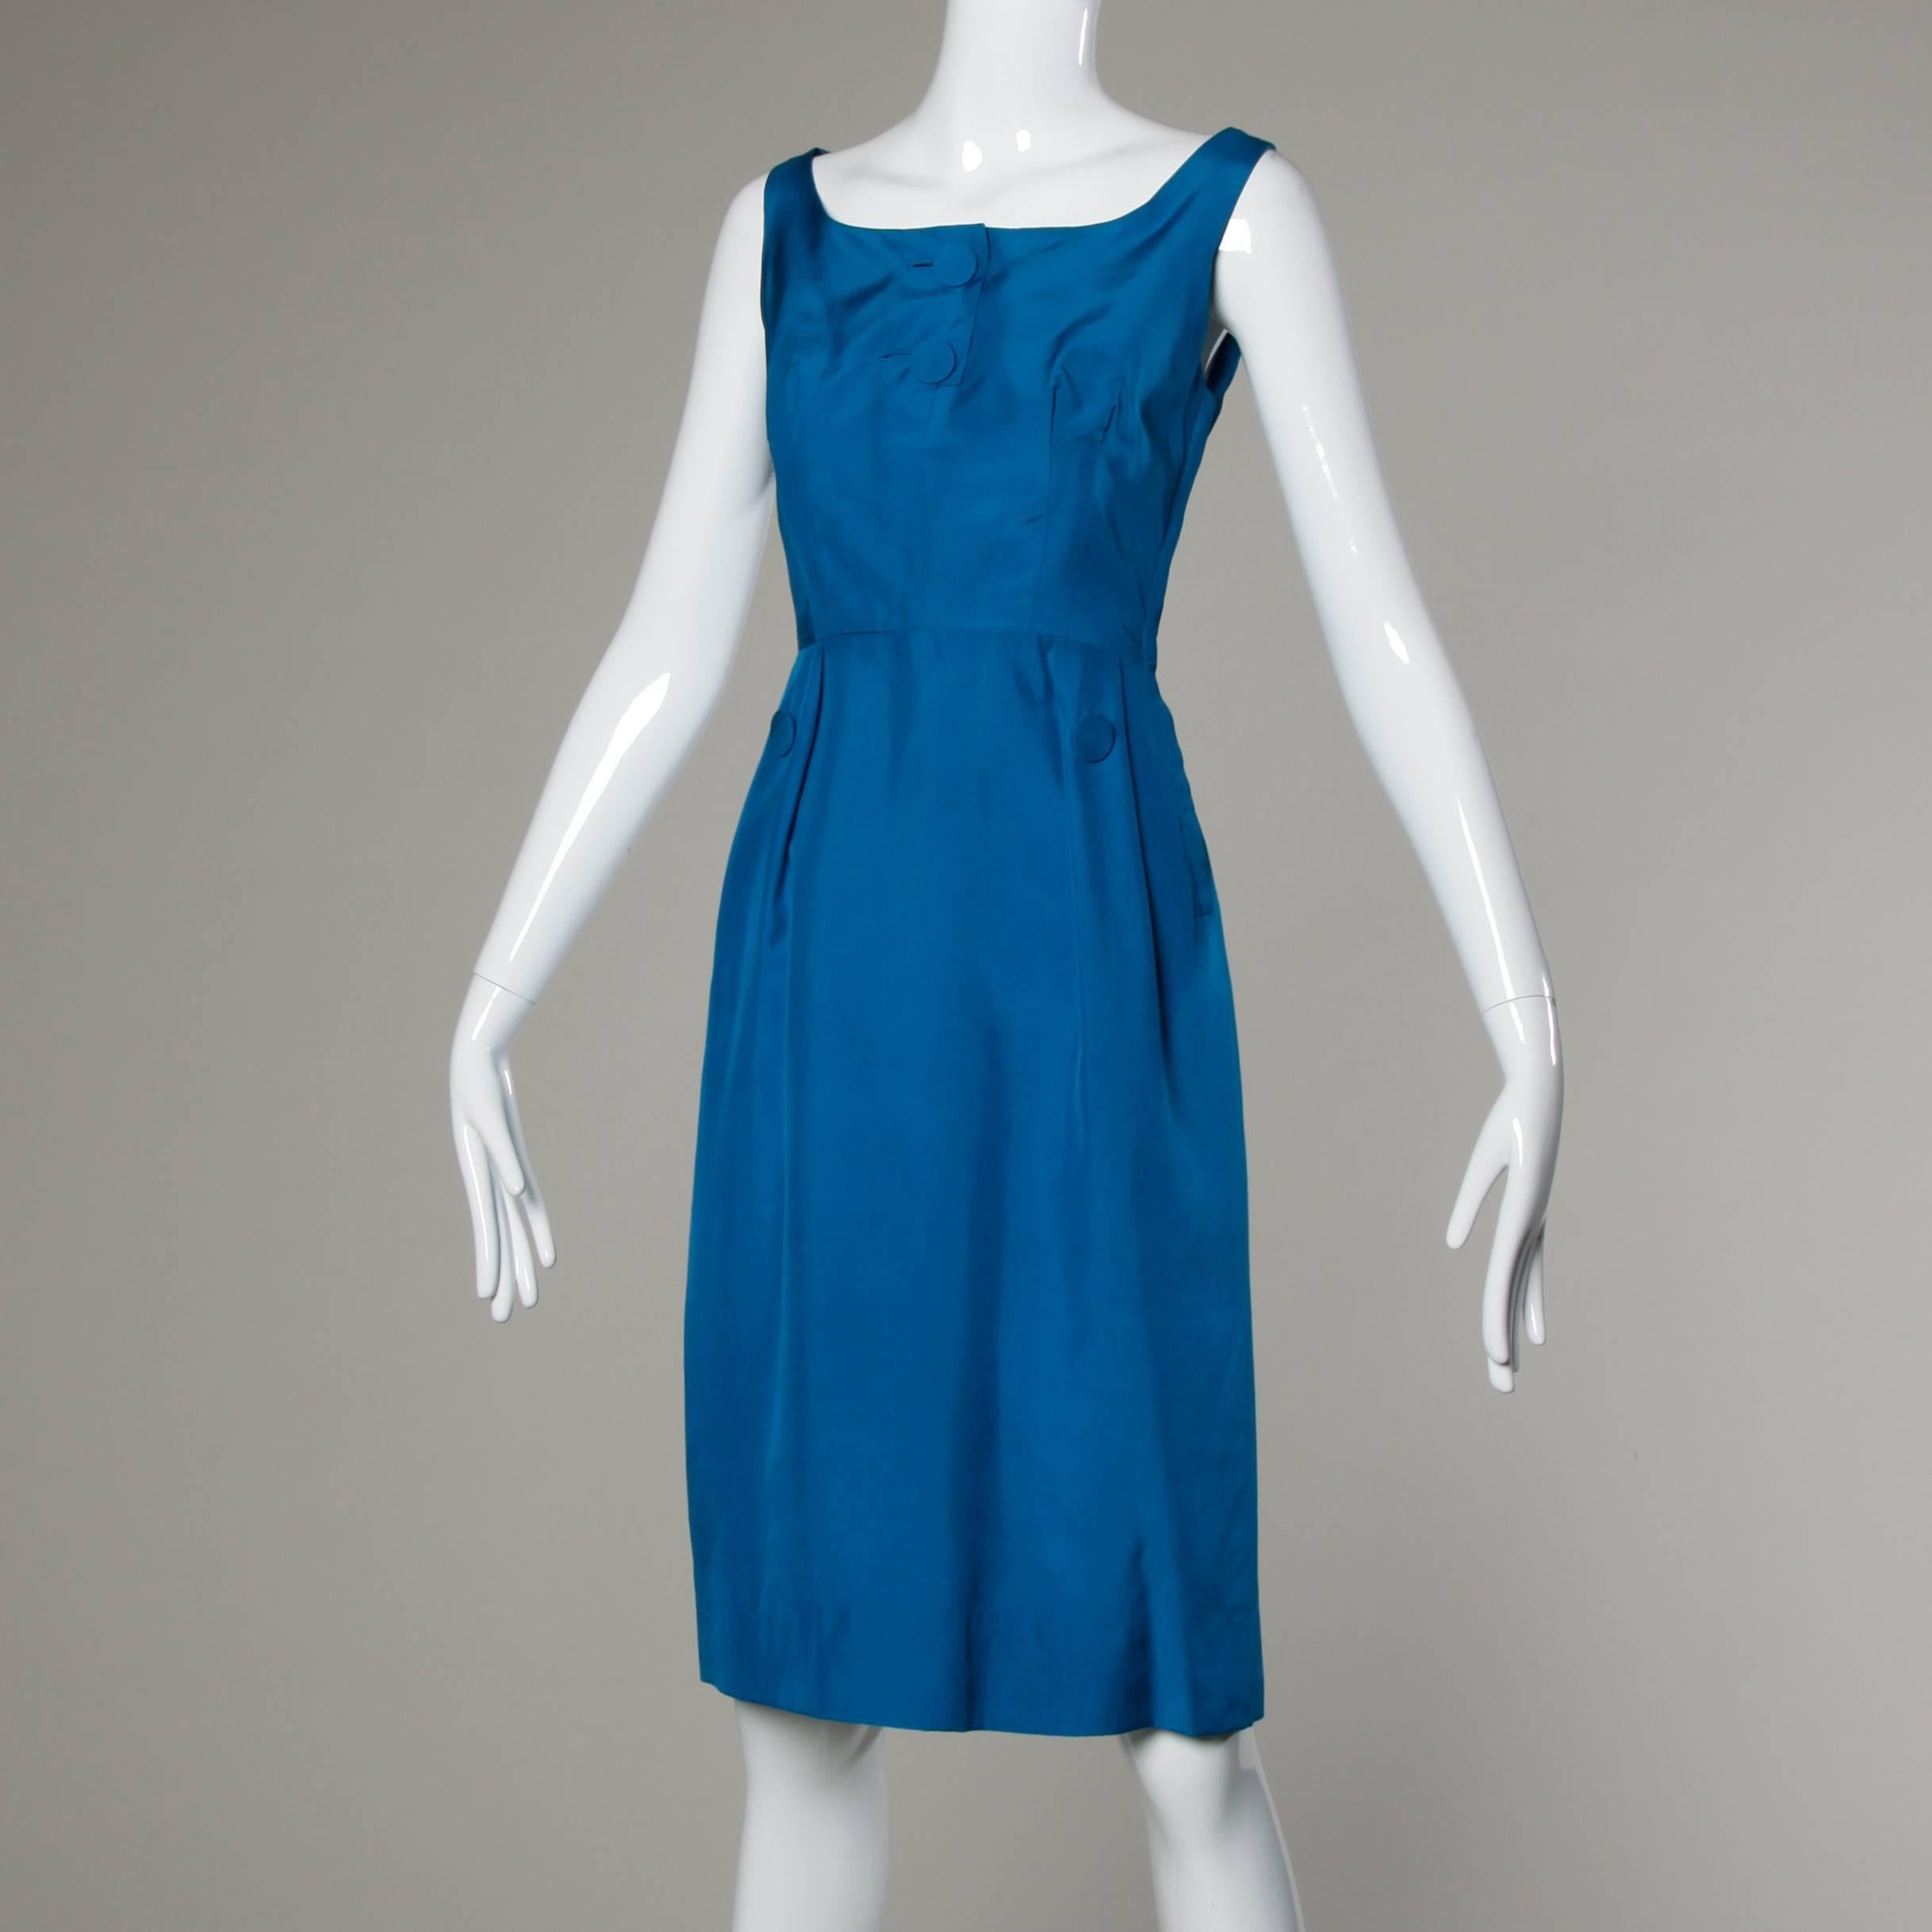 1950s Alfred Shaheen Vibrant Blue Silk Cocktail Dress In Excellent Condition For Sale In Sparks, NV